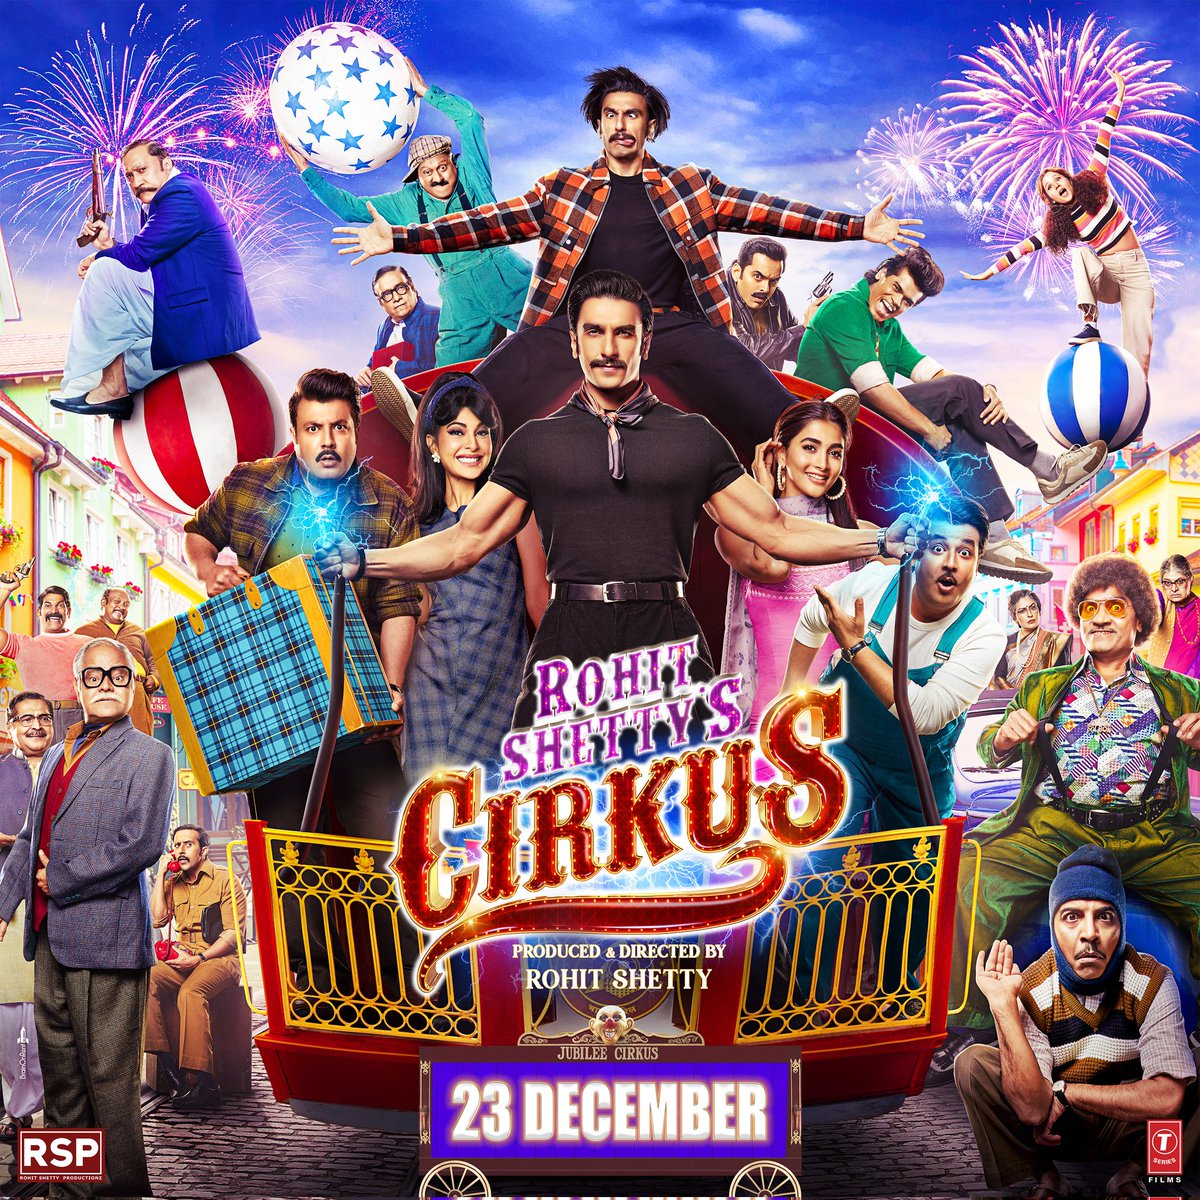 For your family... From your family members... Rohit shetty & team! #CirkusThisChristmas @tseries